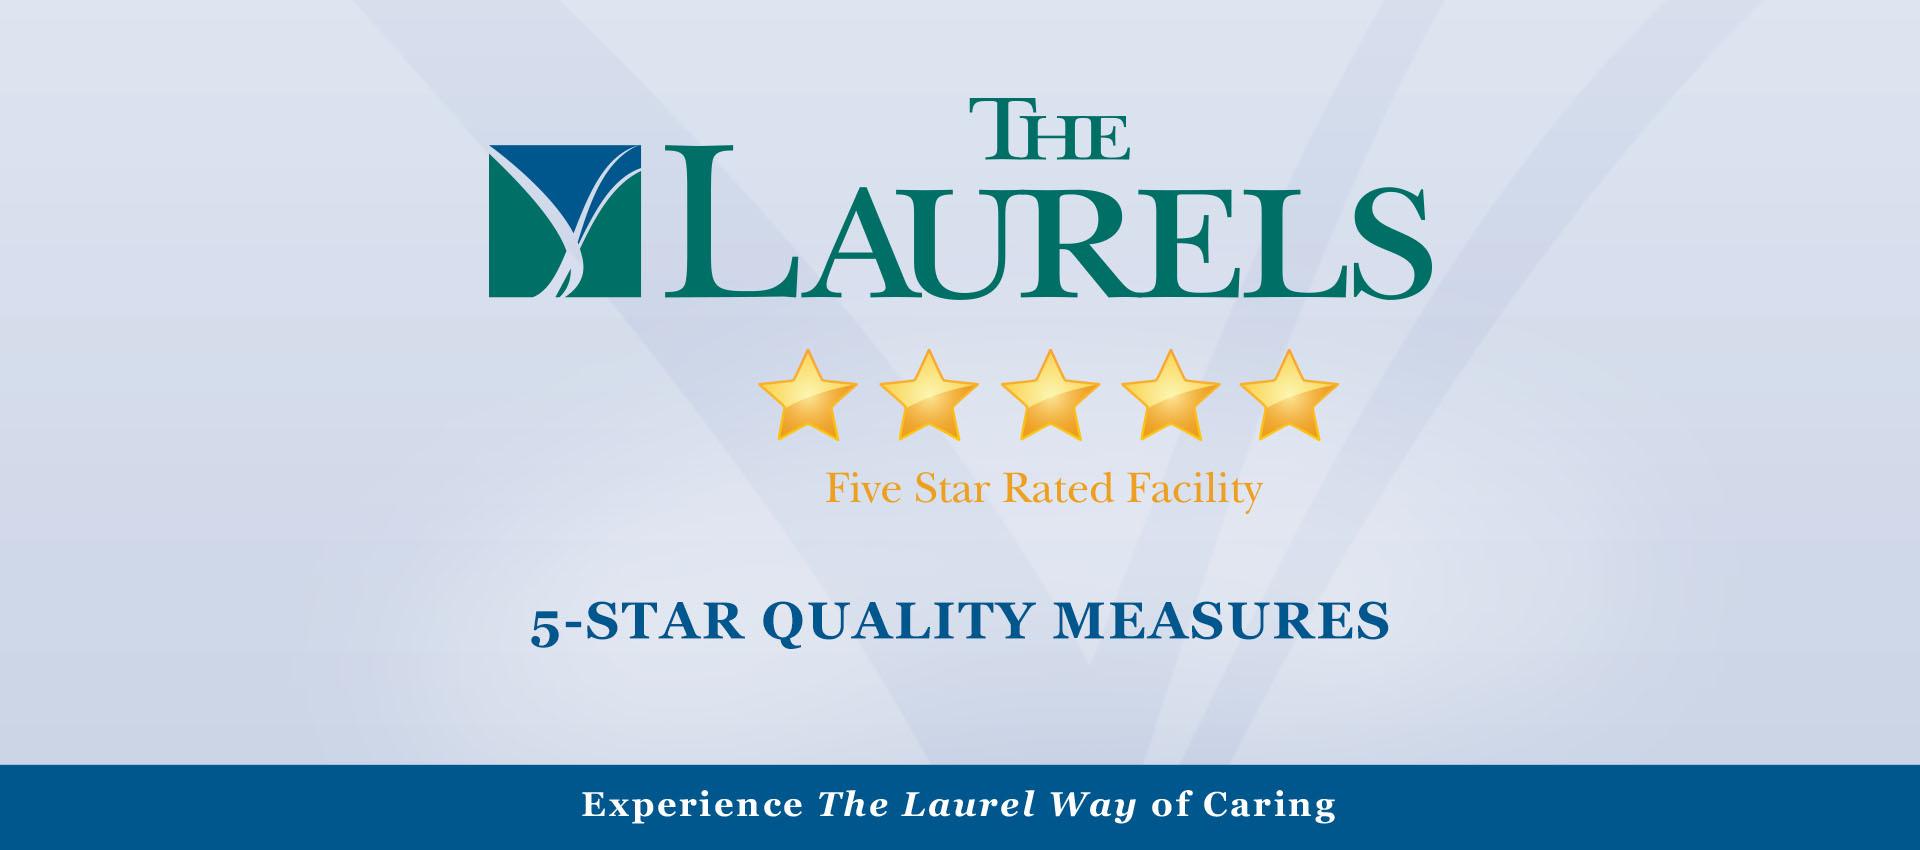 5-Star Quality Measures